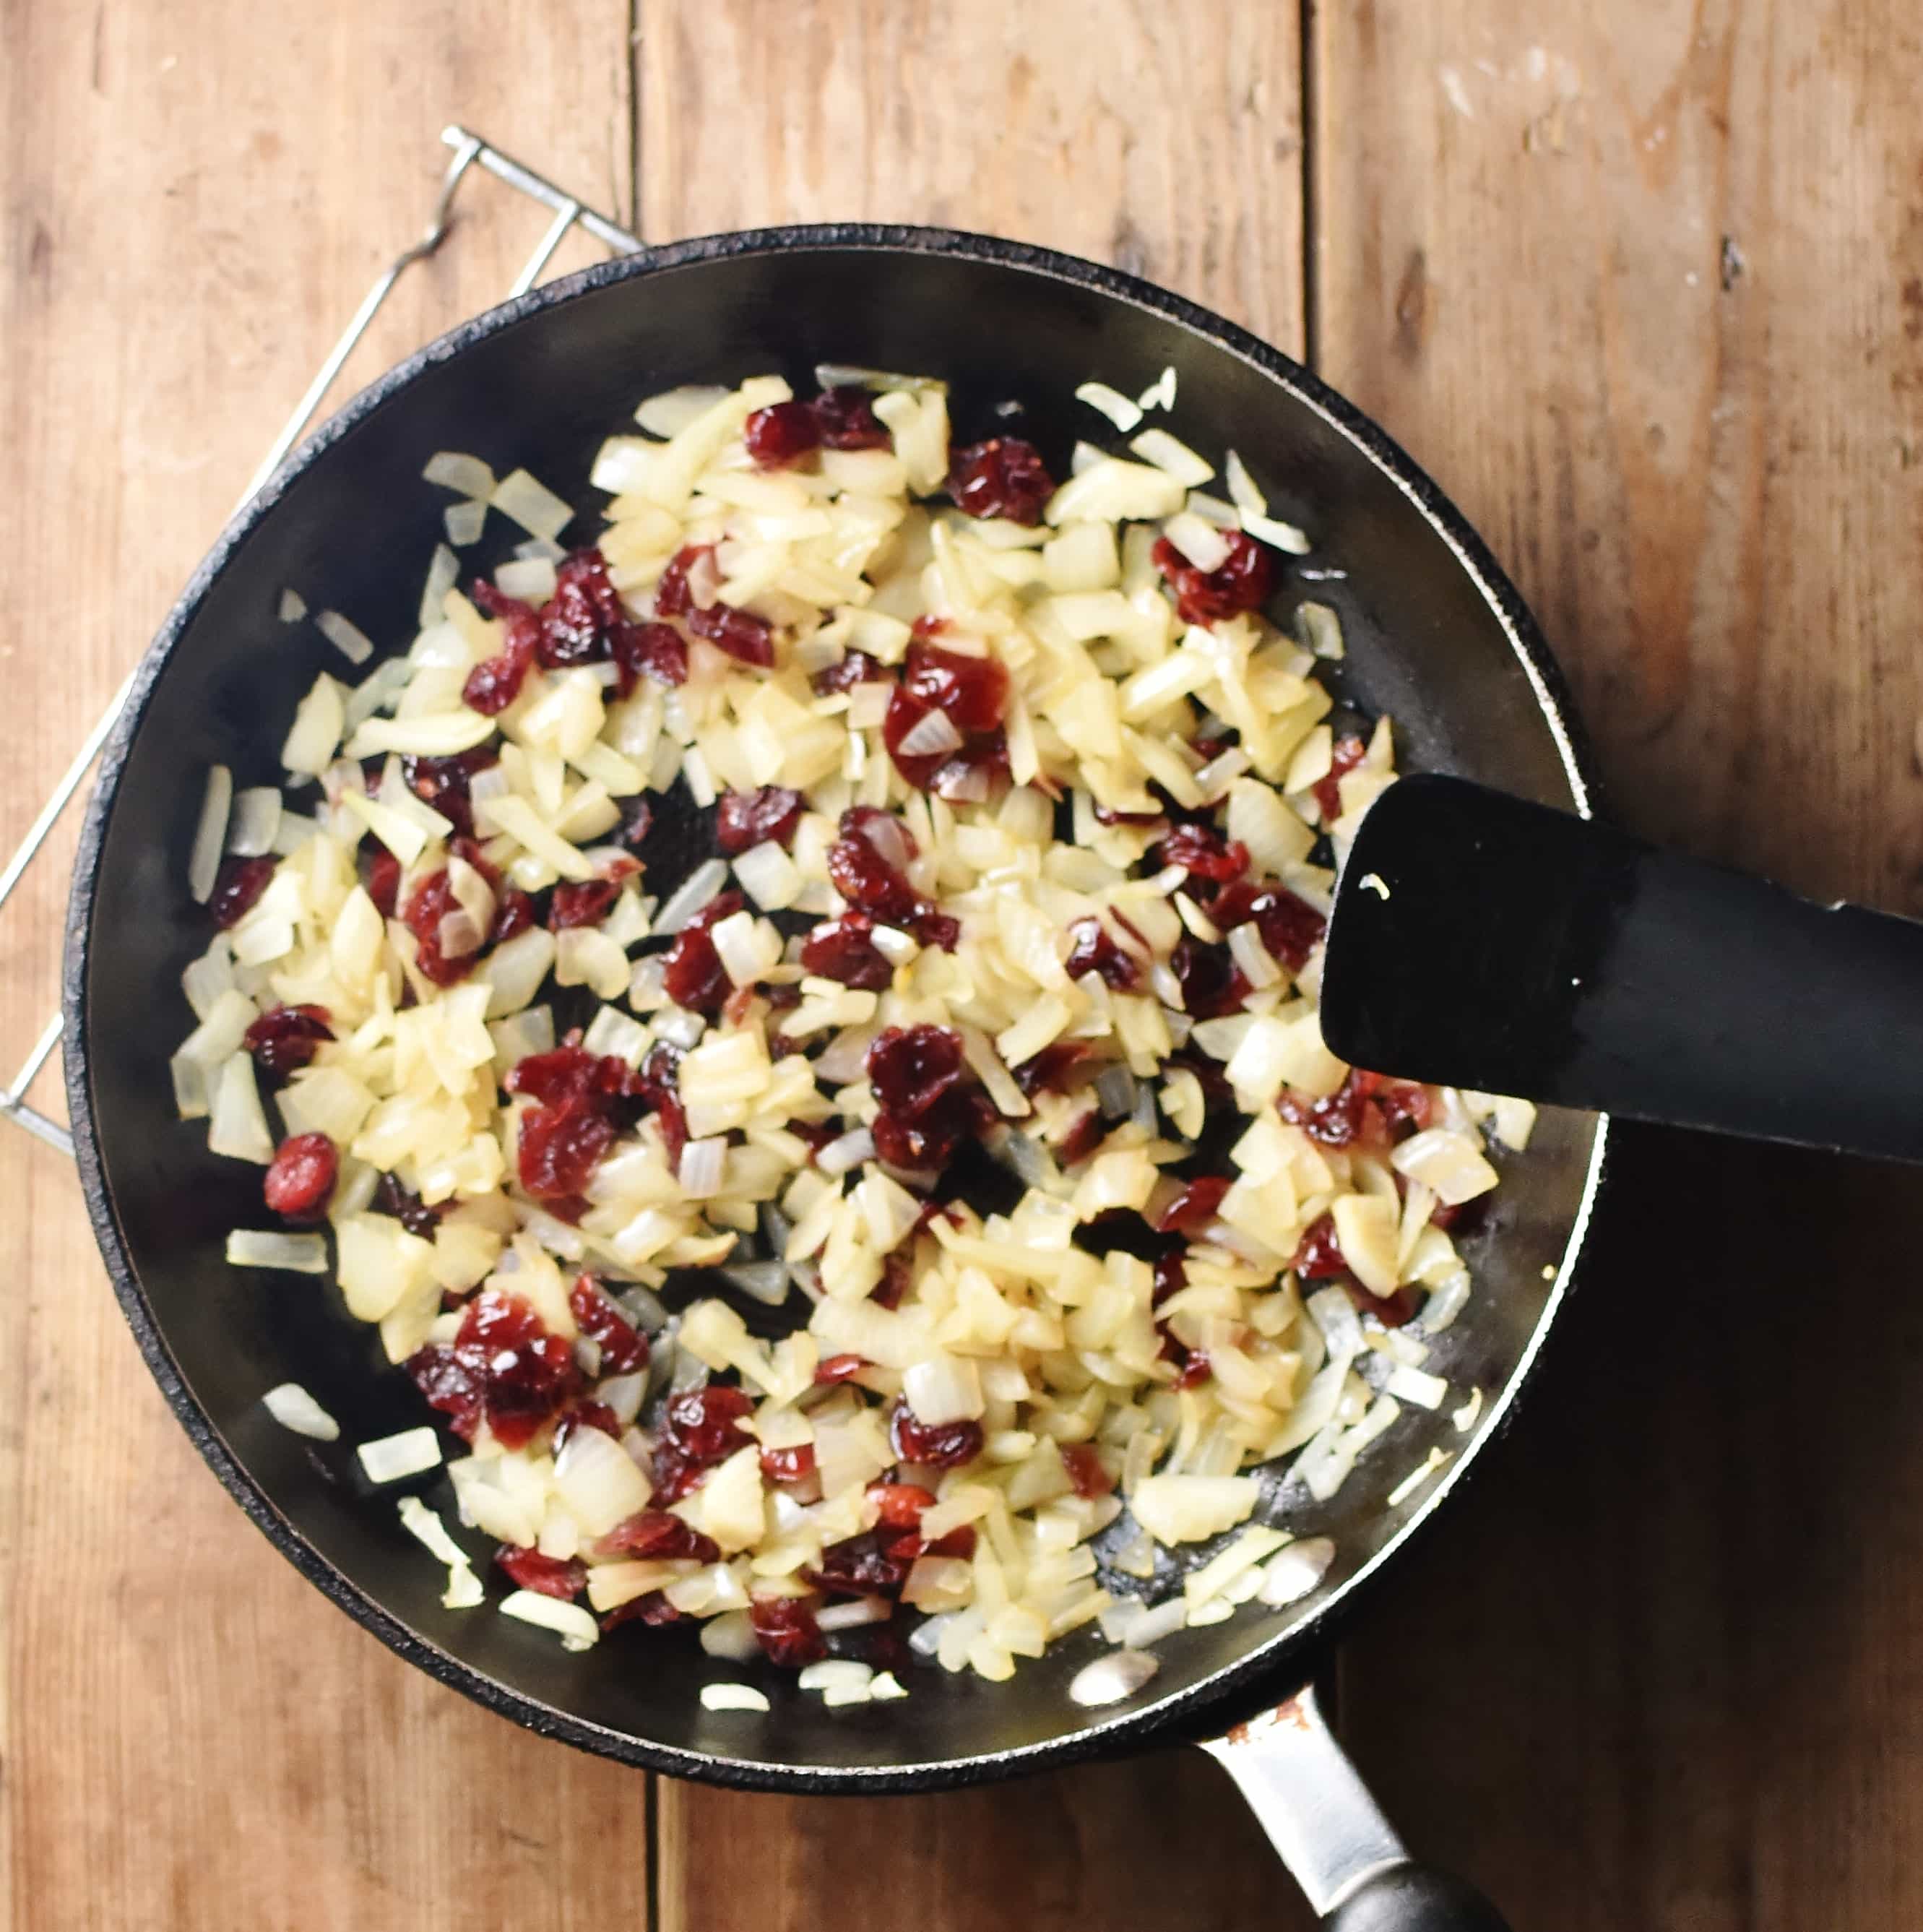 Chopped onions and cranberries in pan with black spatula.